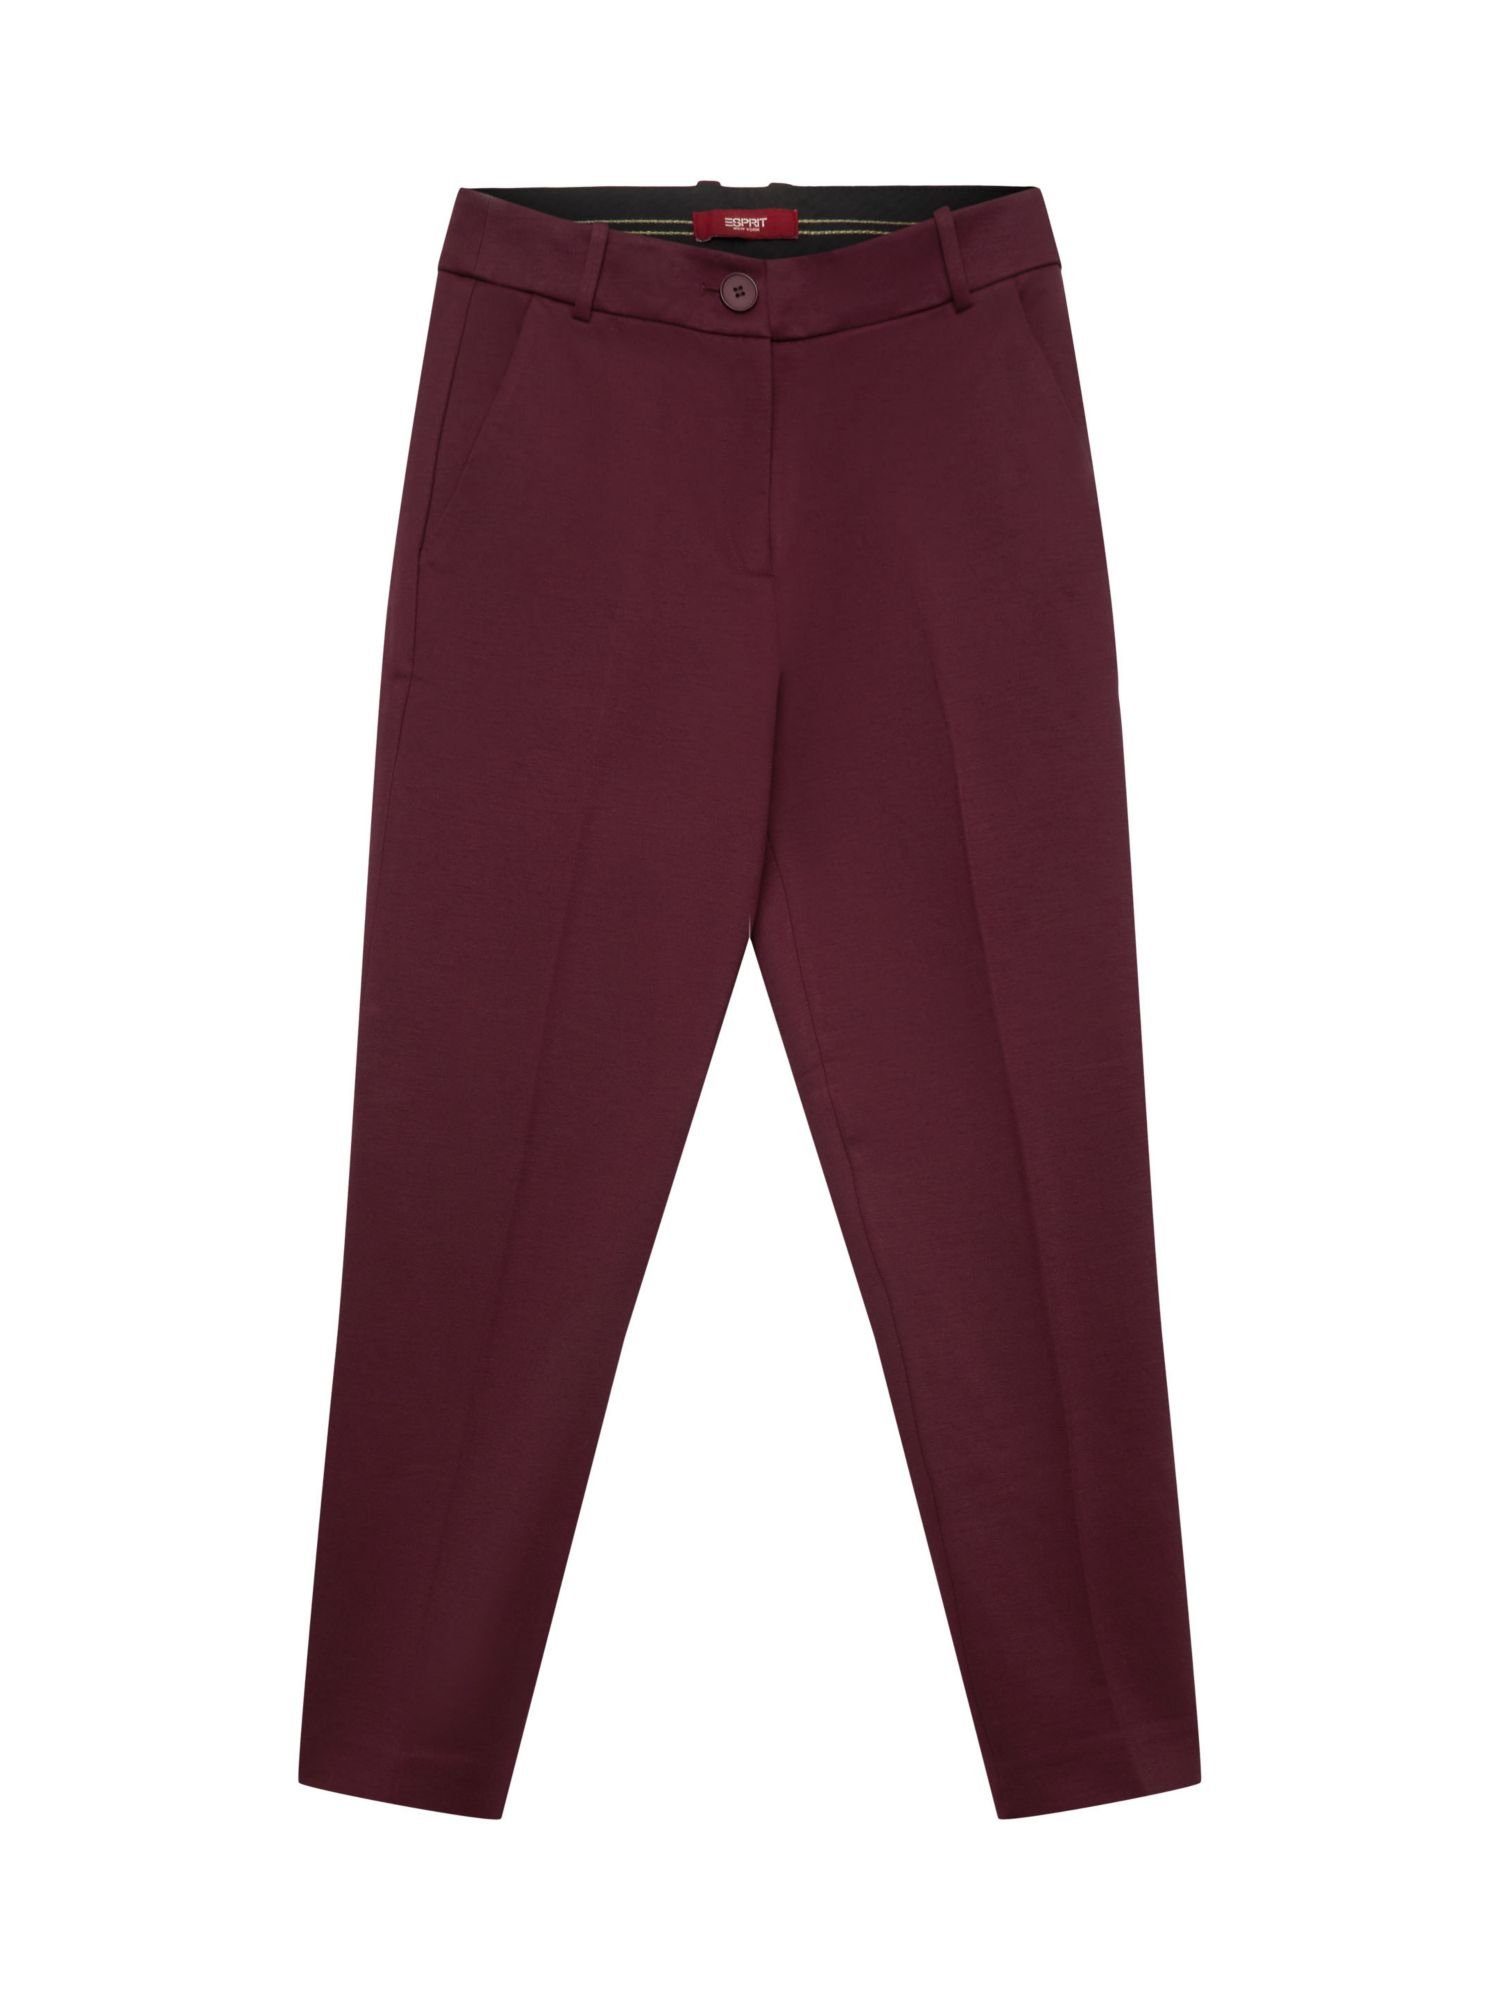 Pants PUNTO Mix & Tapered Esprit Stretch-Hose Match Collection AUBERGINE SPORTY